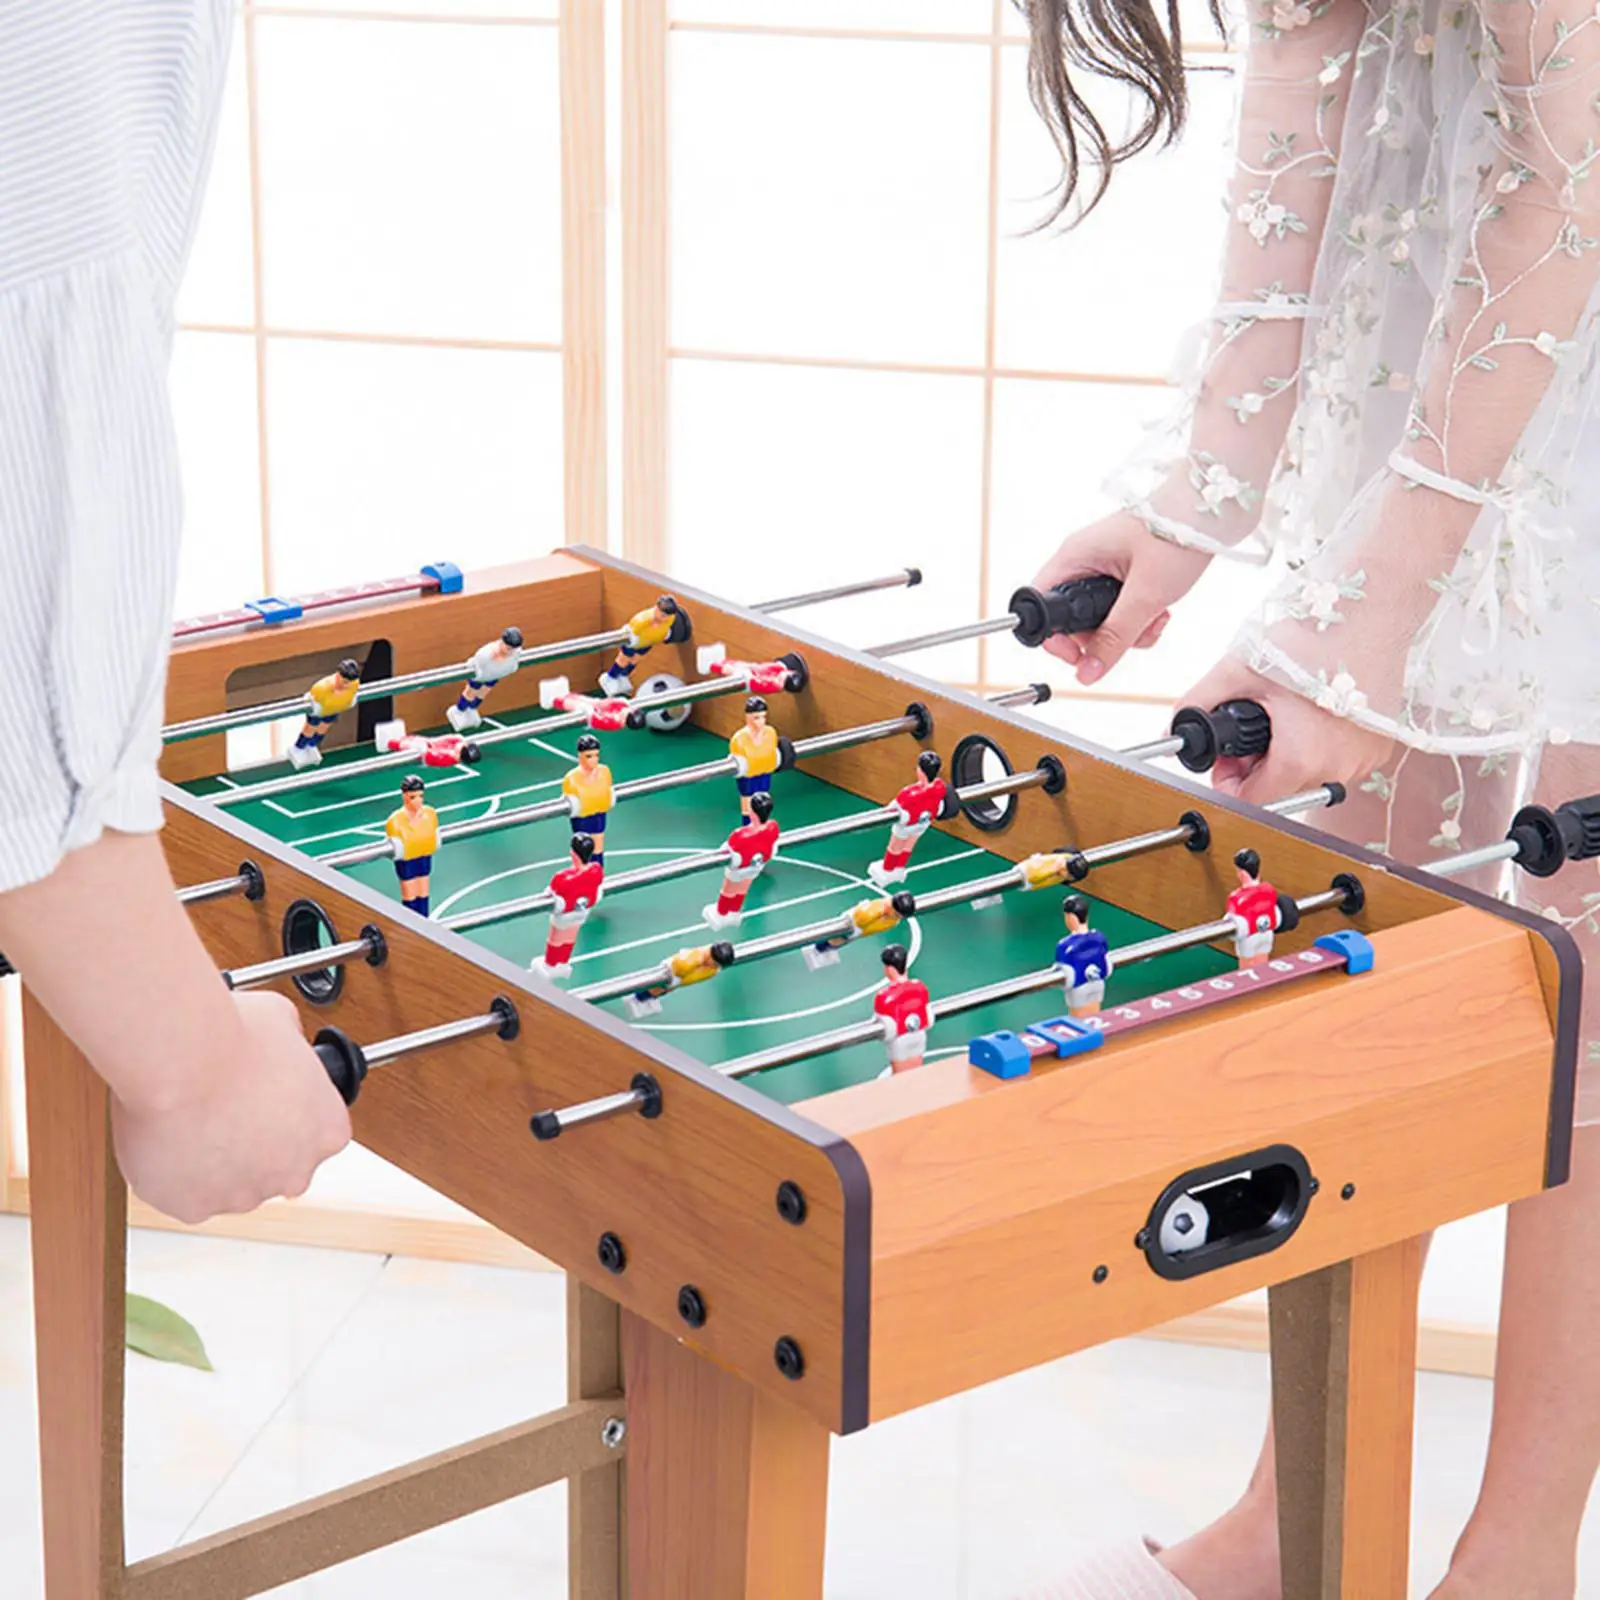 Portable Foosball Table Toy Tabletop Football Game Desktop Game for Family